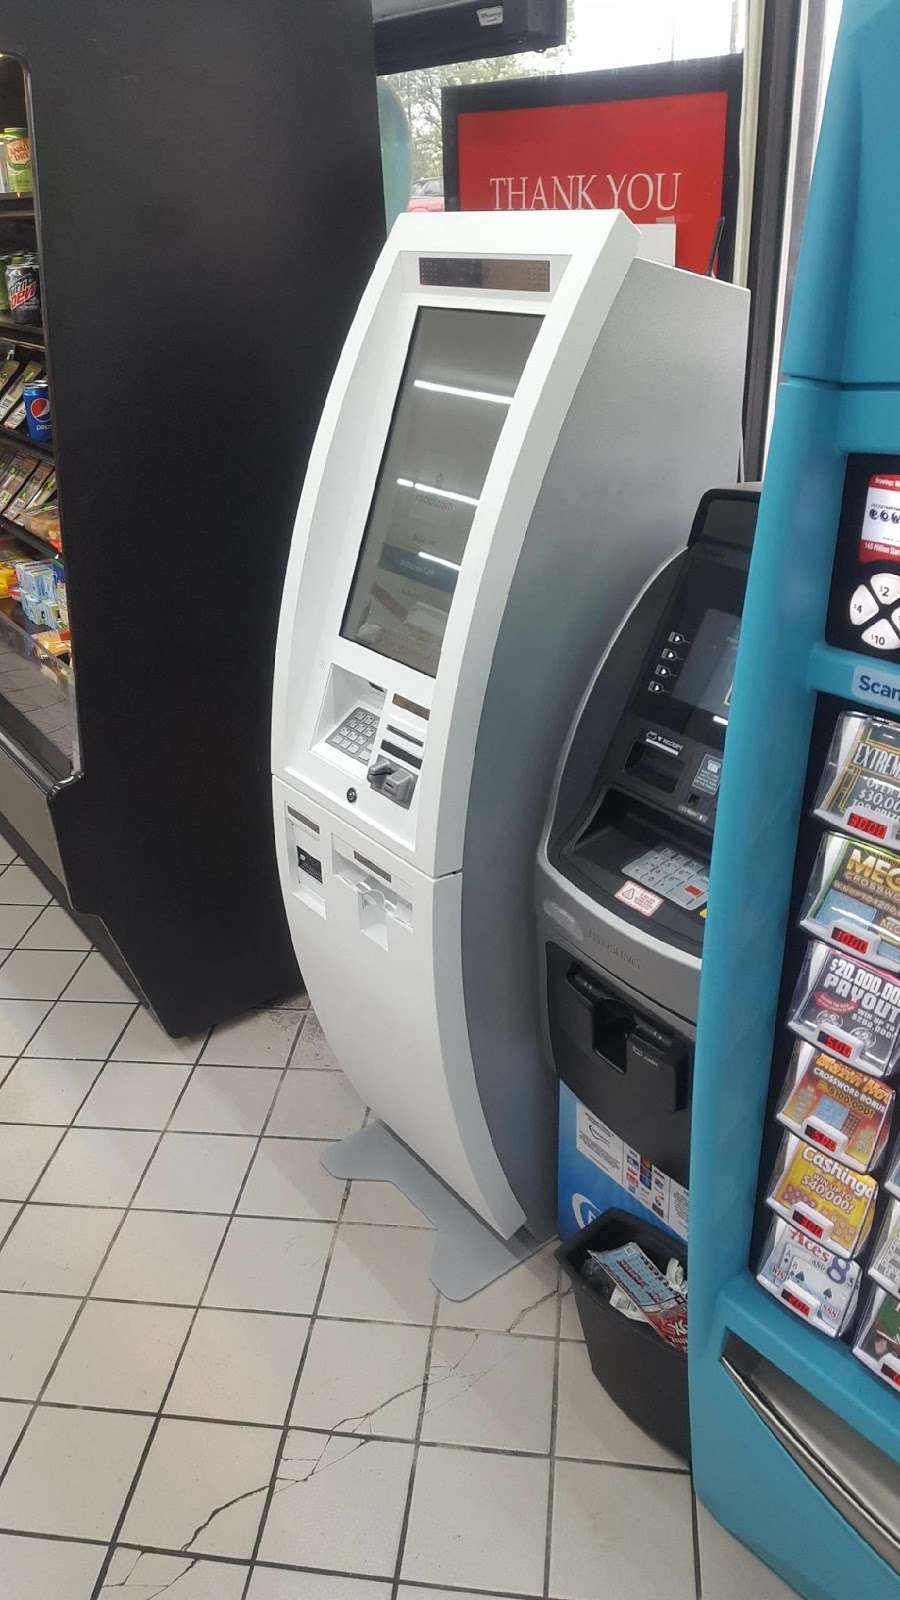 Rockitcoin Bitcoin Atm 1215 S Girls School Rd Indianapolis In 46231 Usa